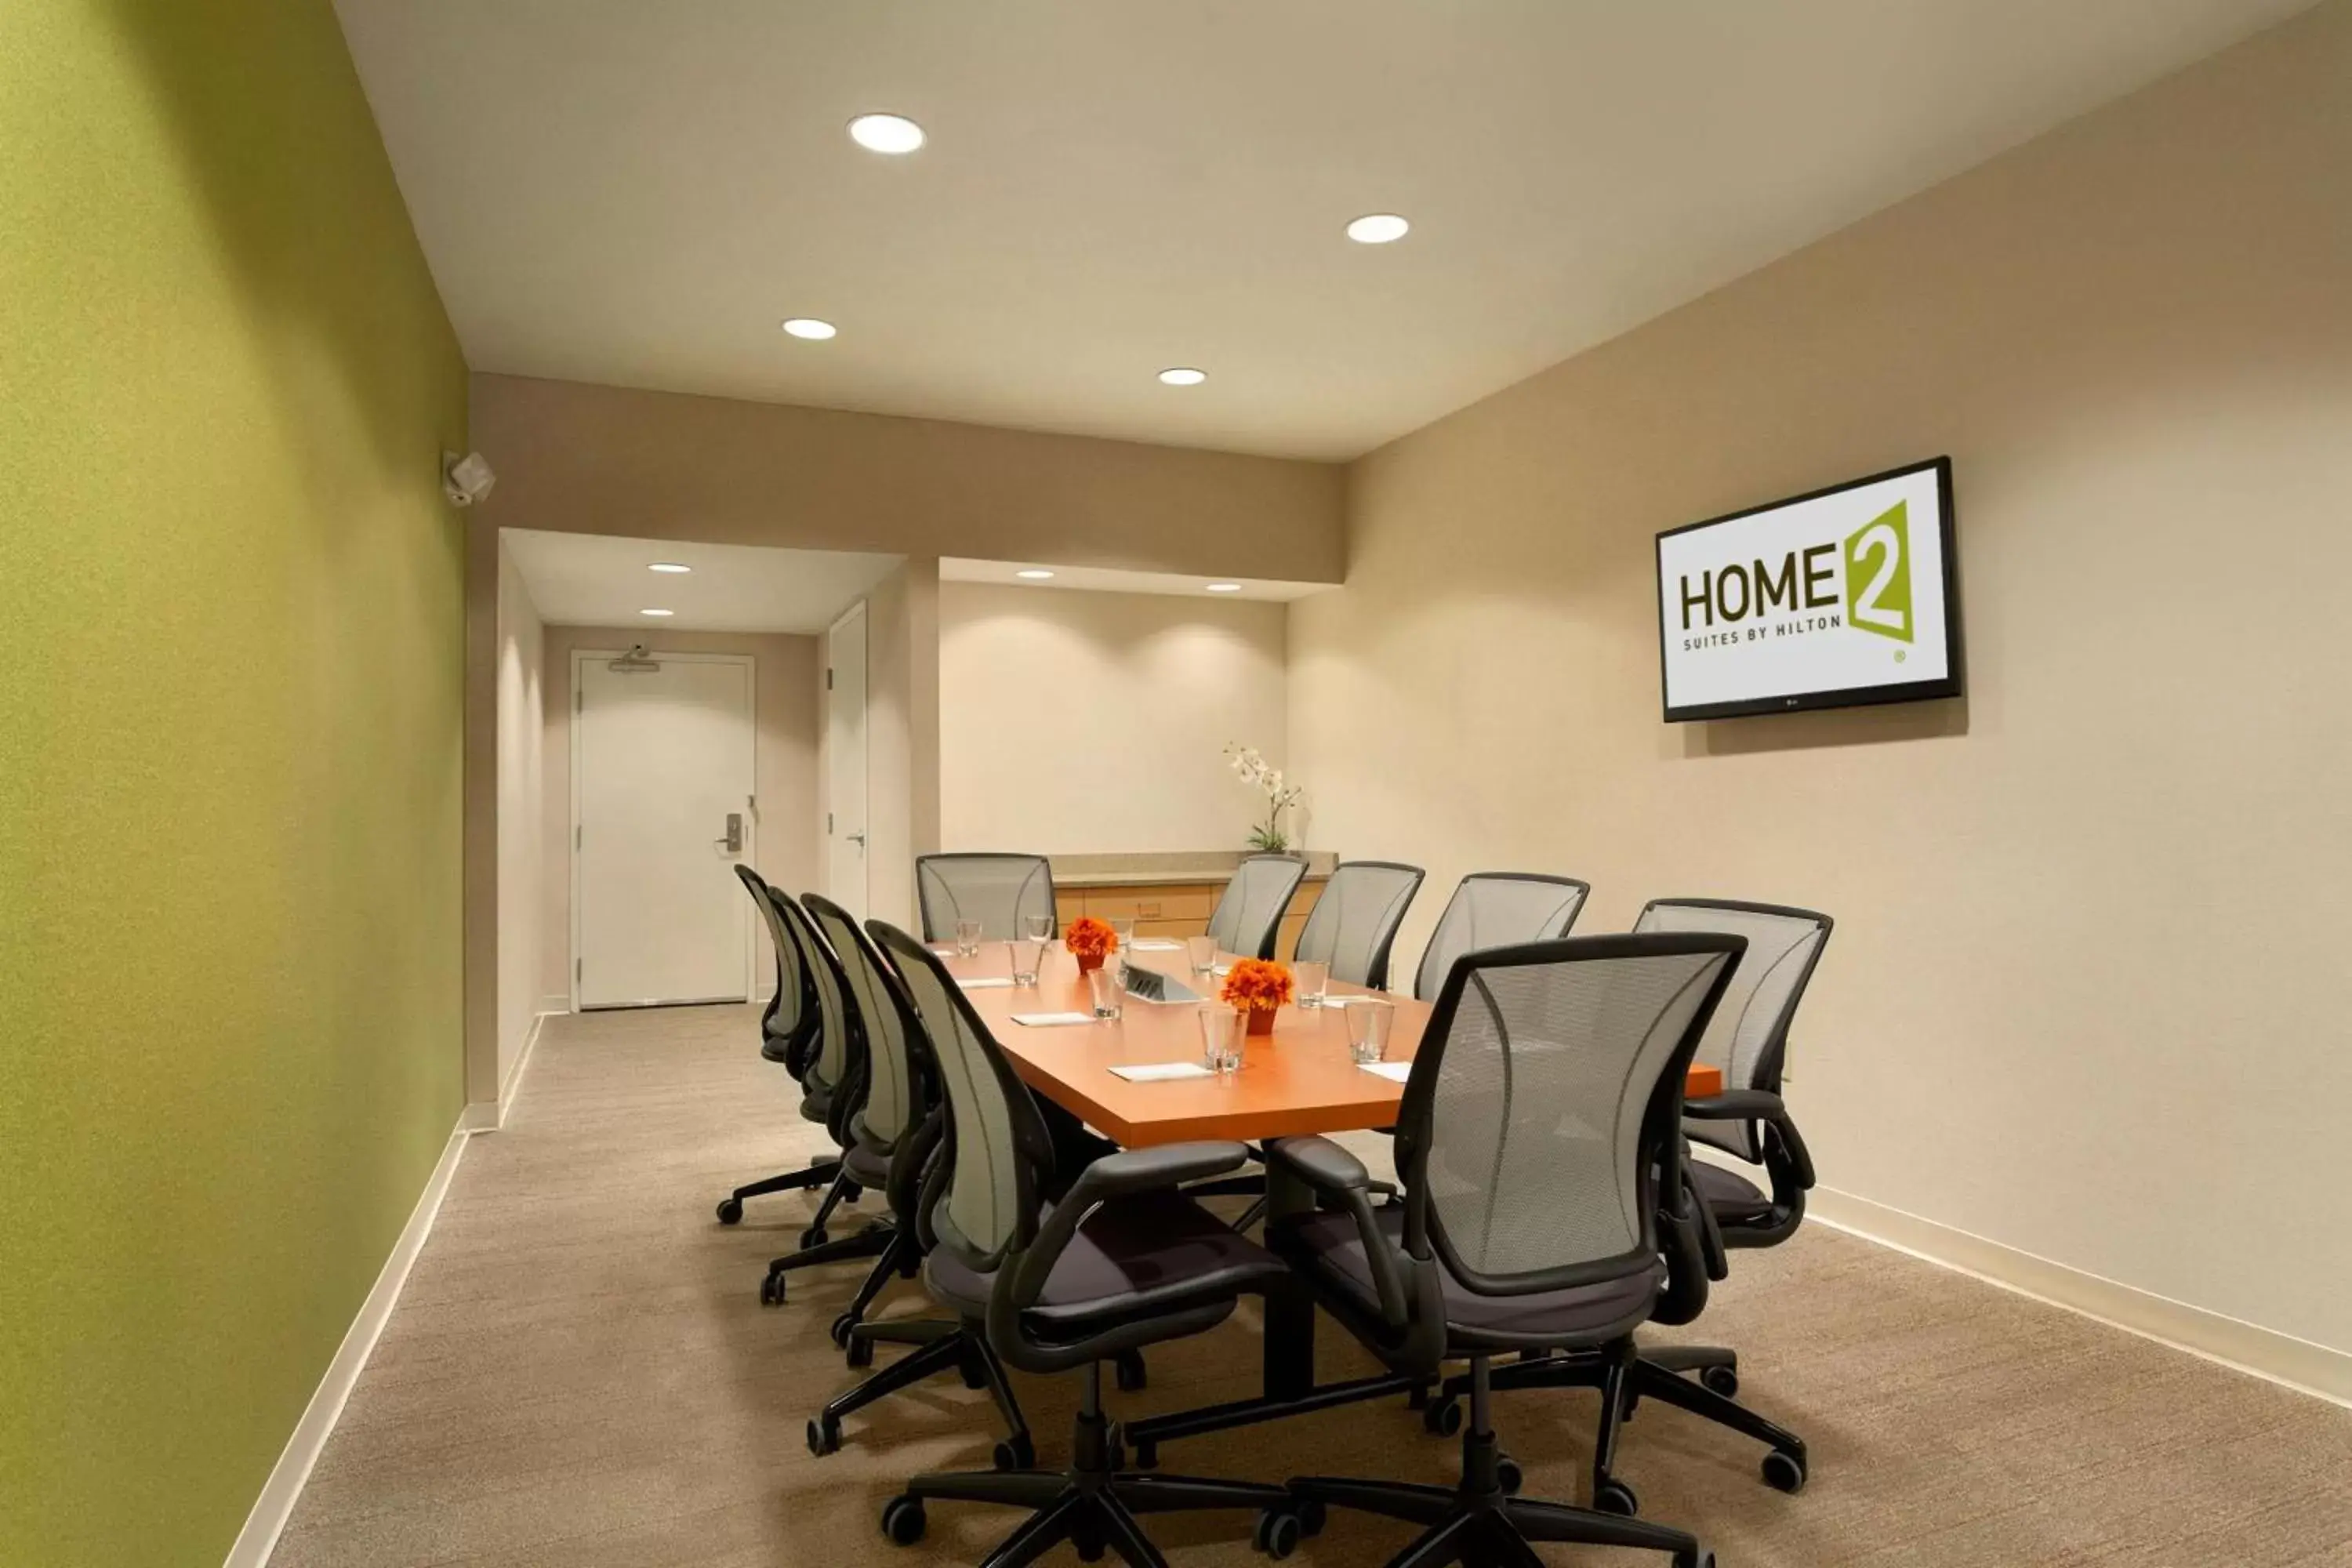 Meeting/conference room in Home2 Suites by Hilton Pittsburgh - McCandless, PA